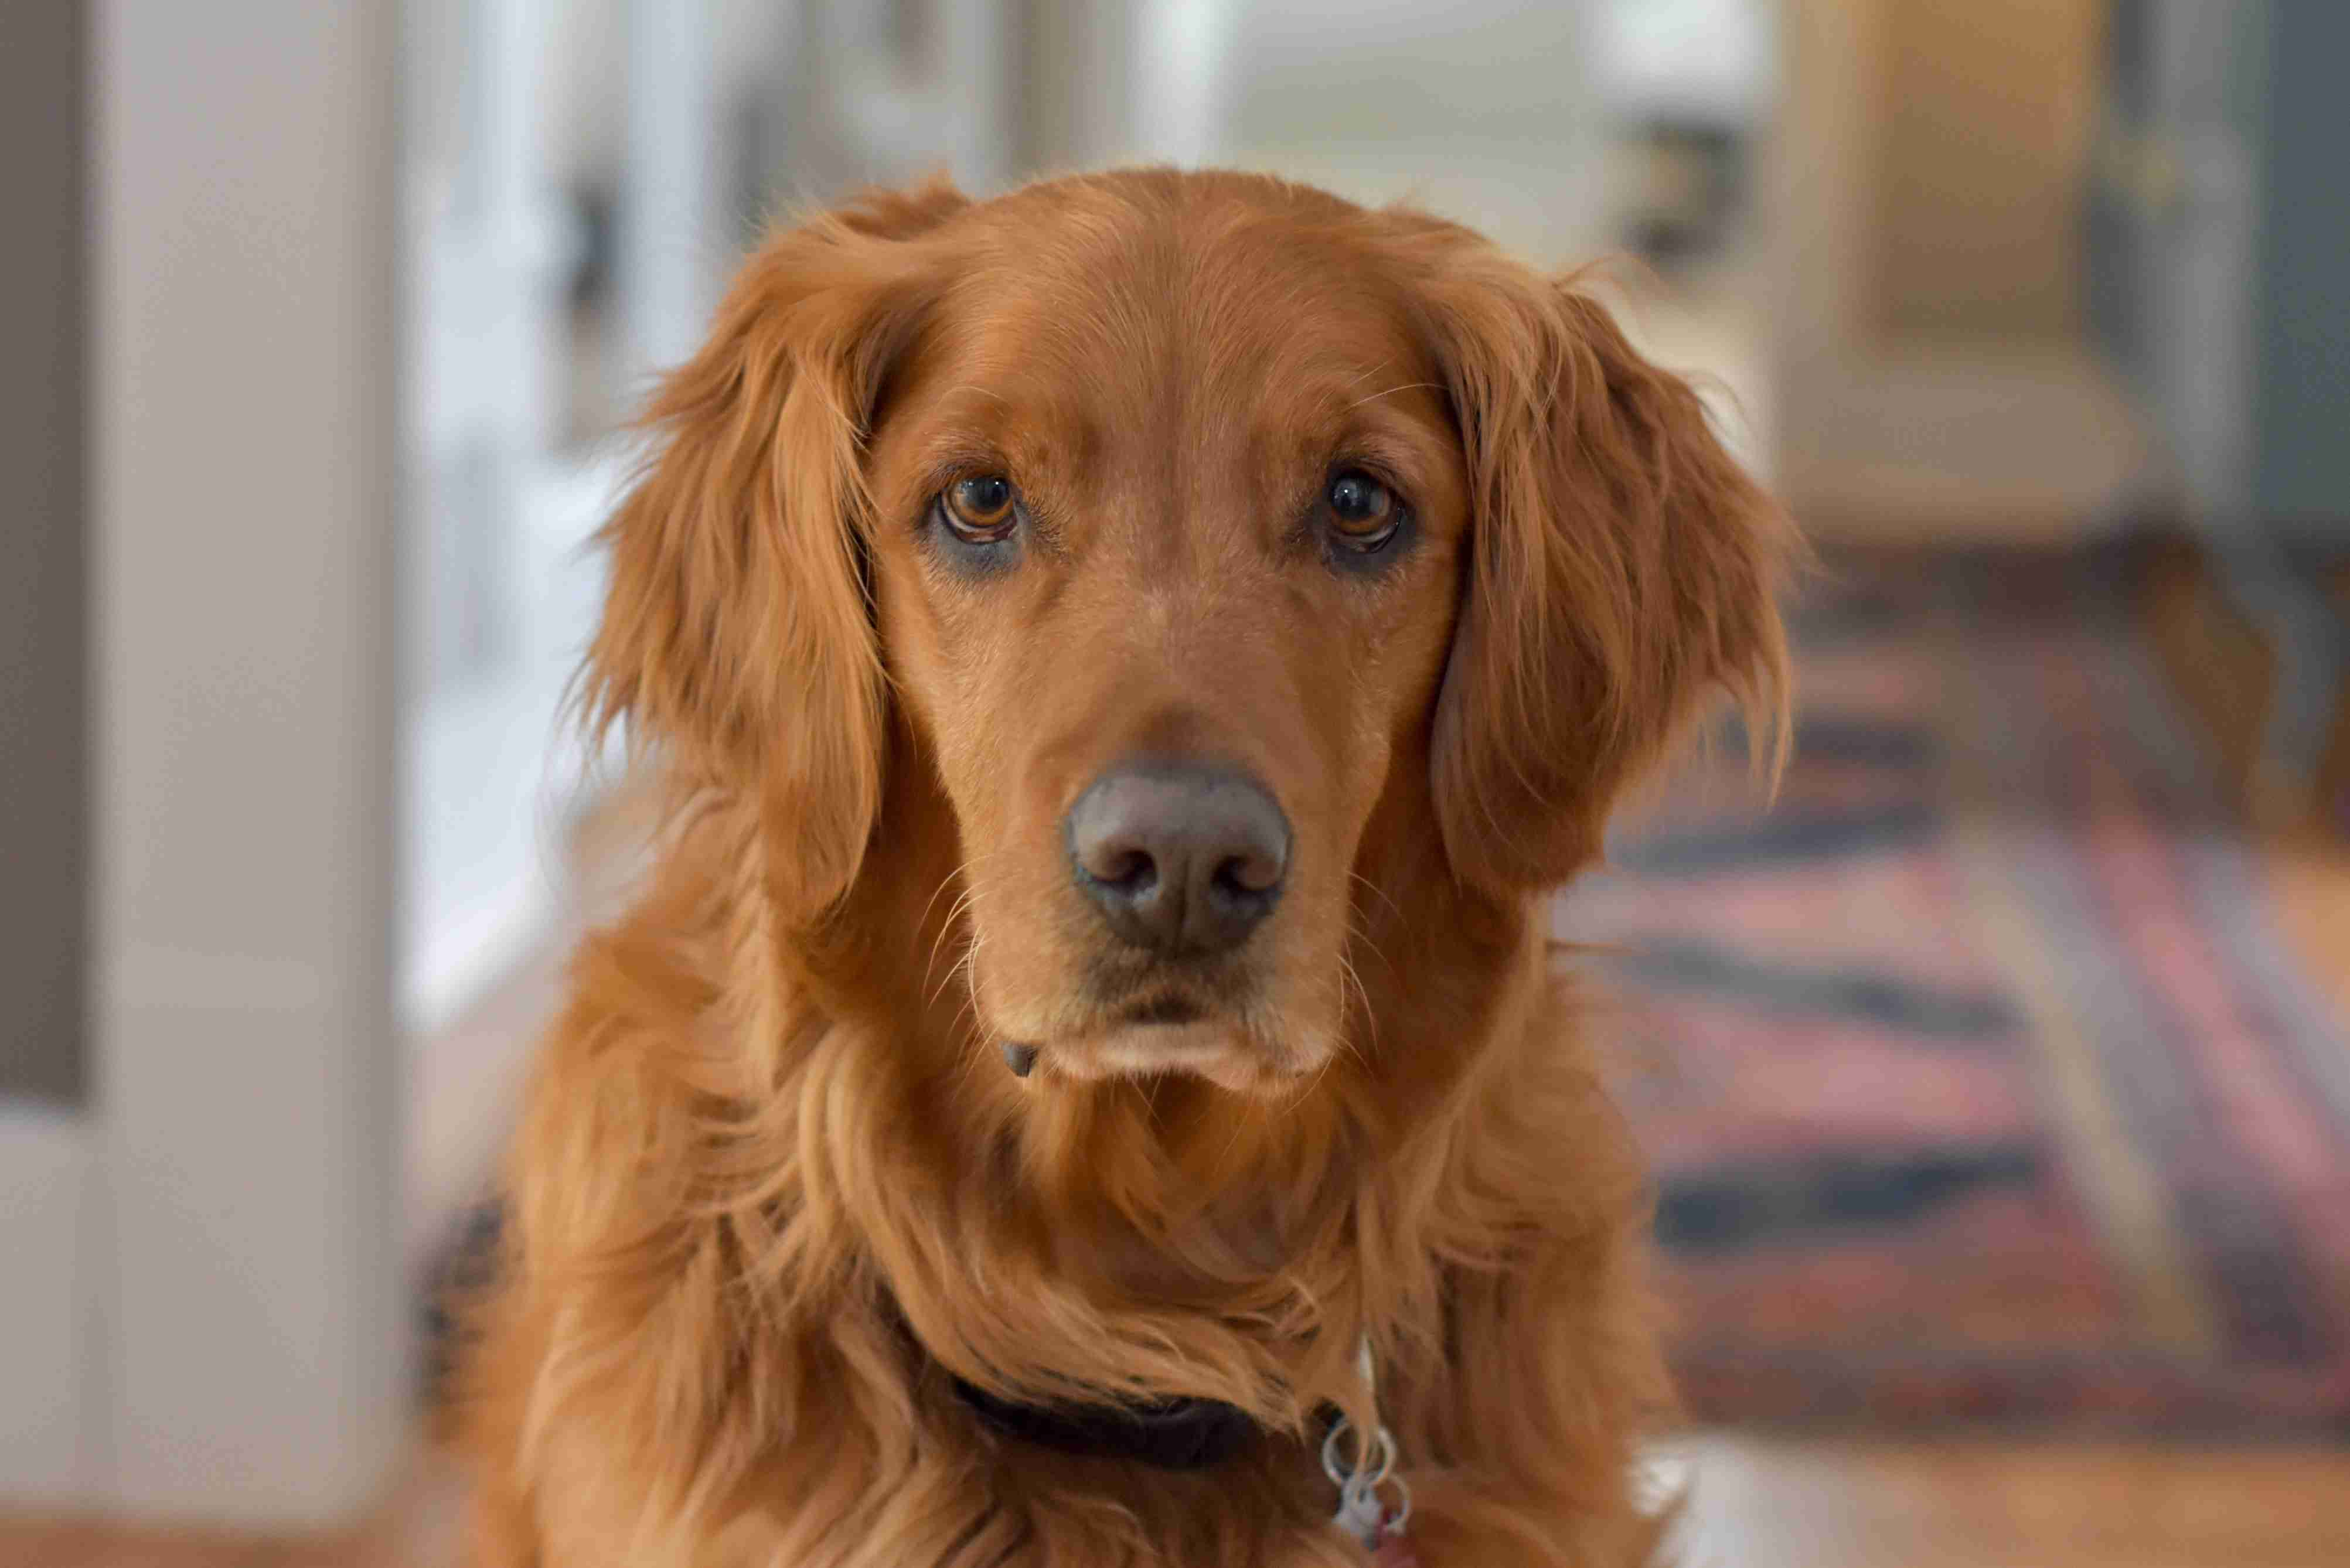 What are some common allergies that Golden Retrievers may have?